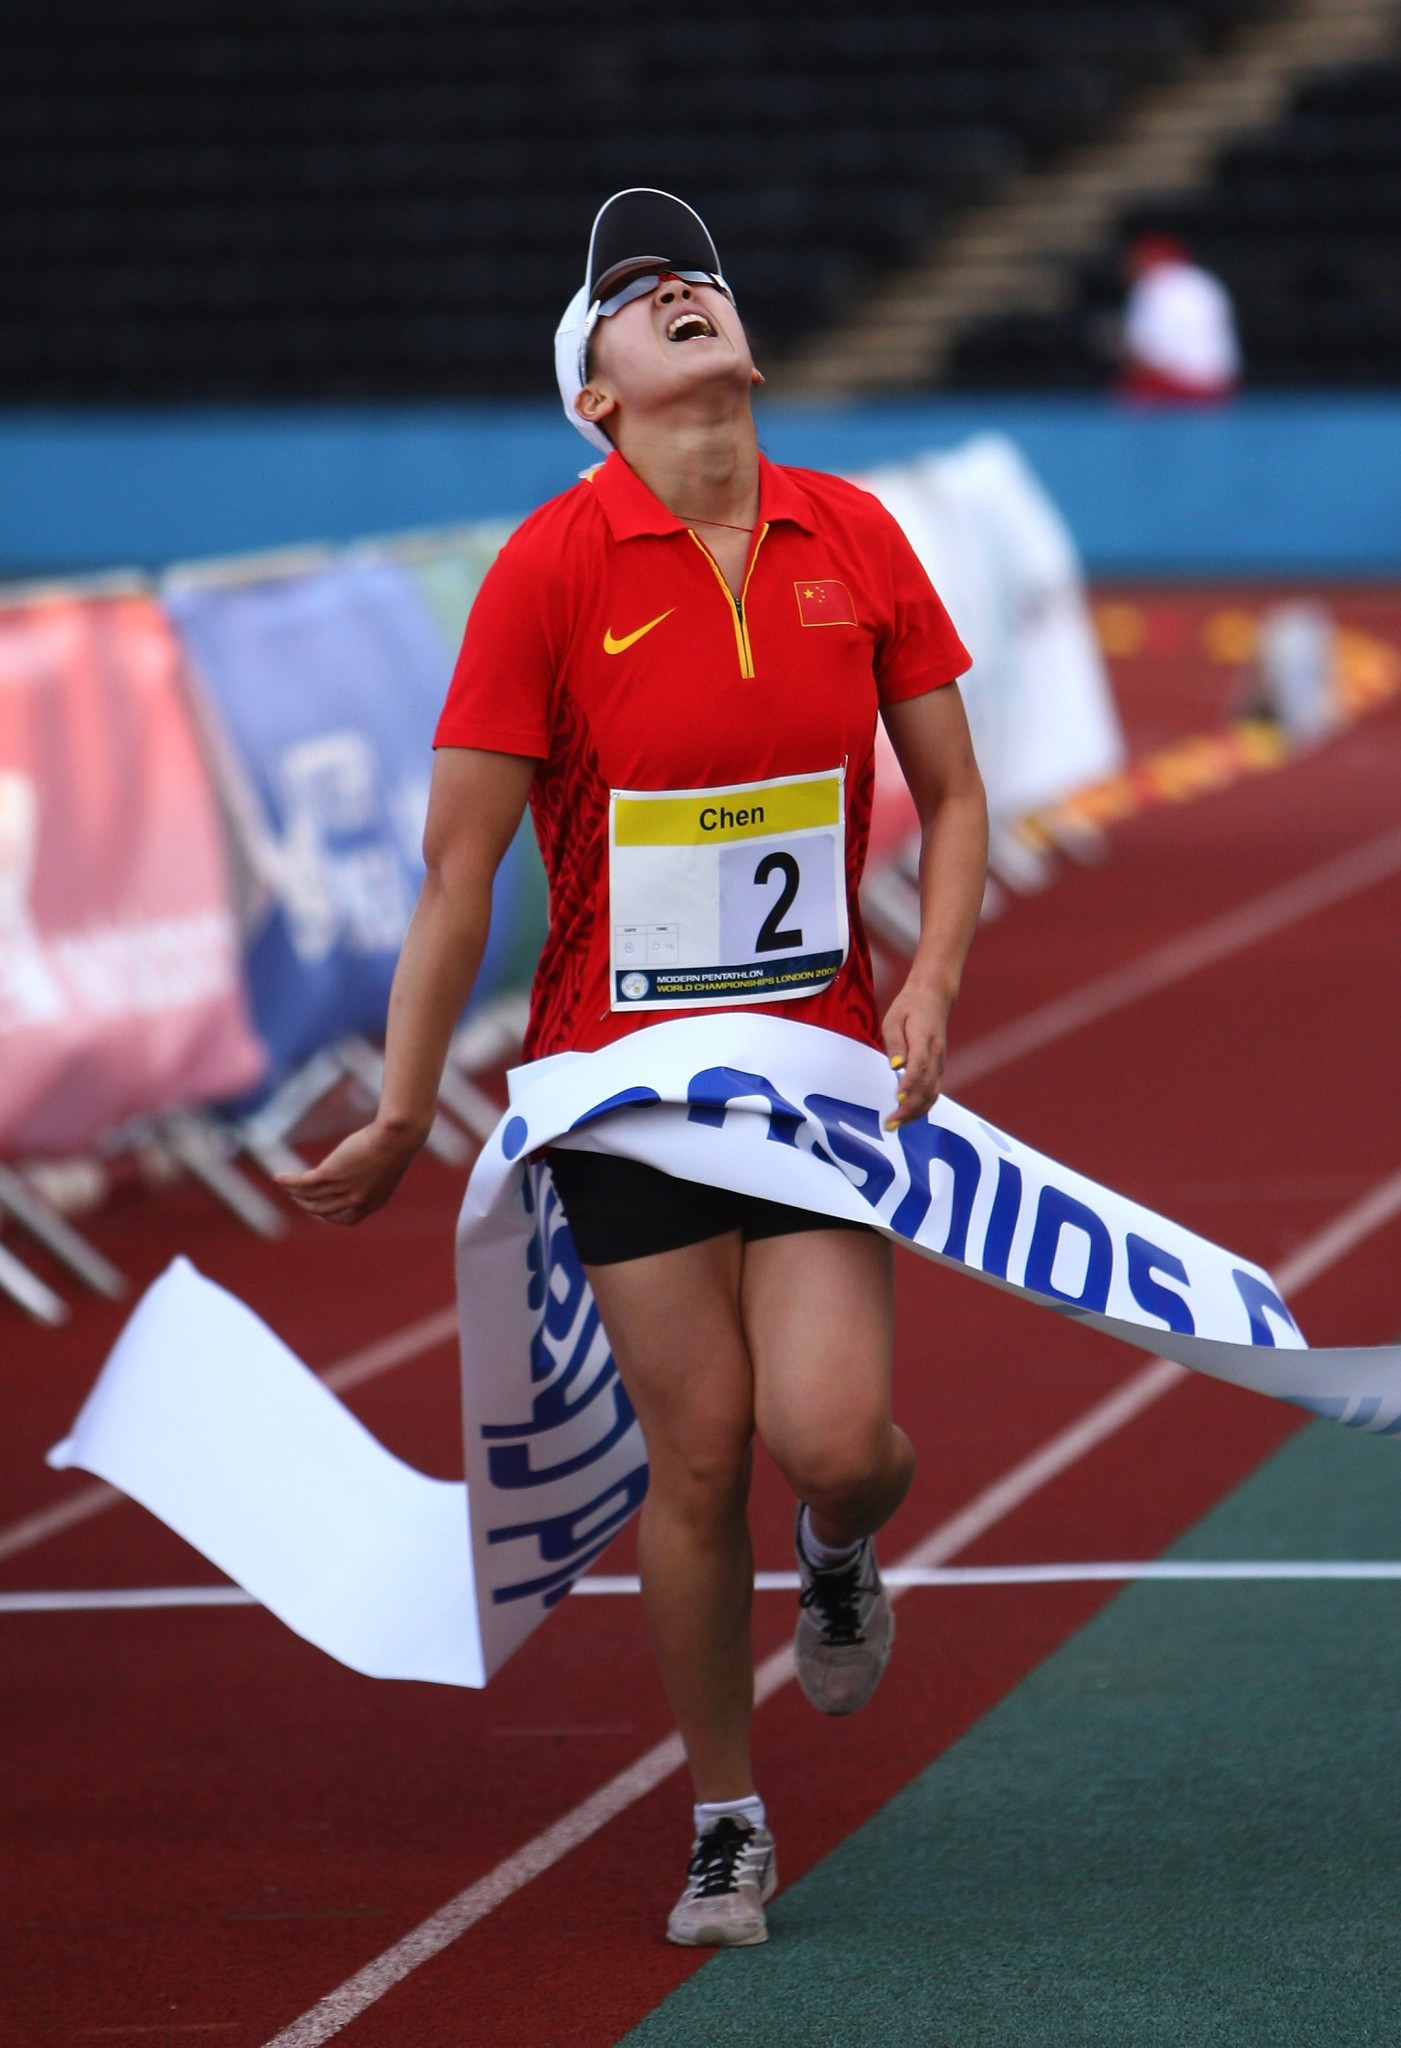 Qian Chen's greatest achievement was winning the 2009 World Championship title in London ©Getty Images